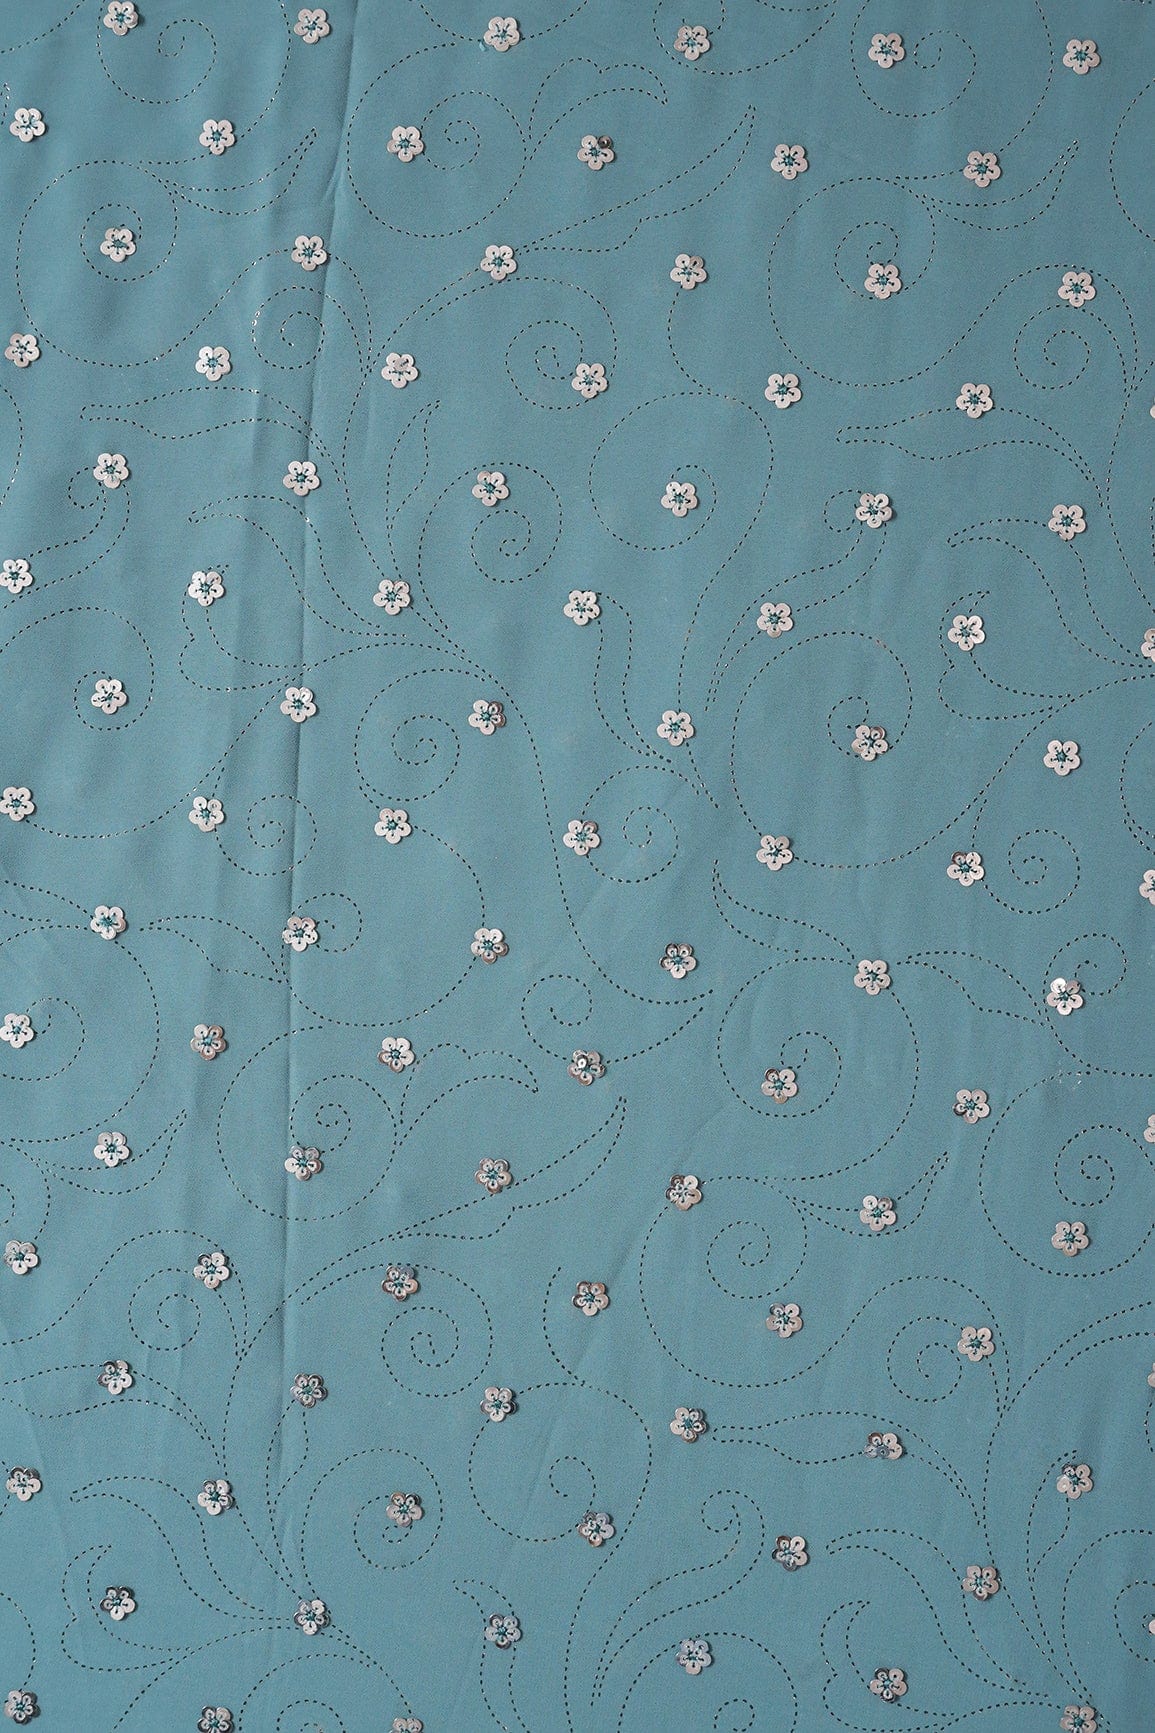 doeraa Embroidery Fabrics Silver Sequins Floral Embroidery With Laser Cut Foil Print On Powder Blue Georgette Fabric